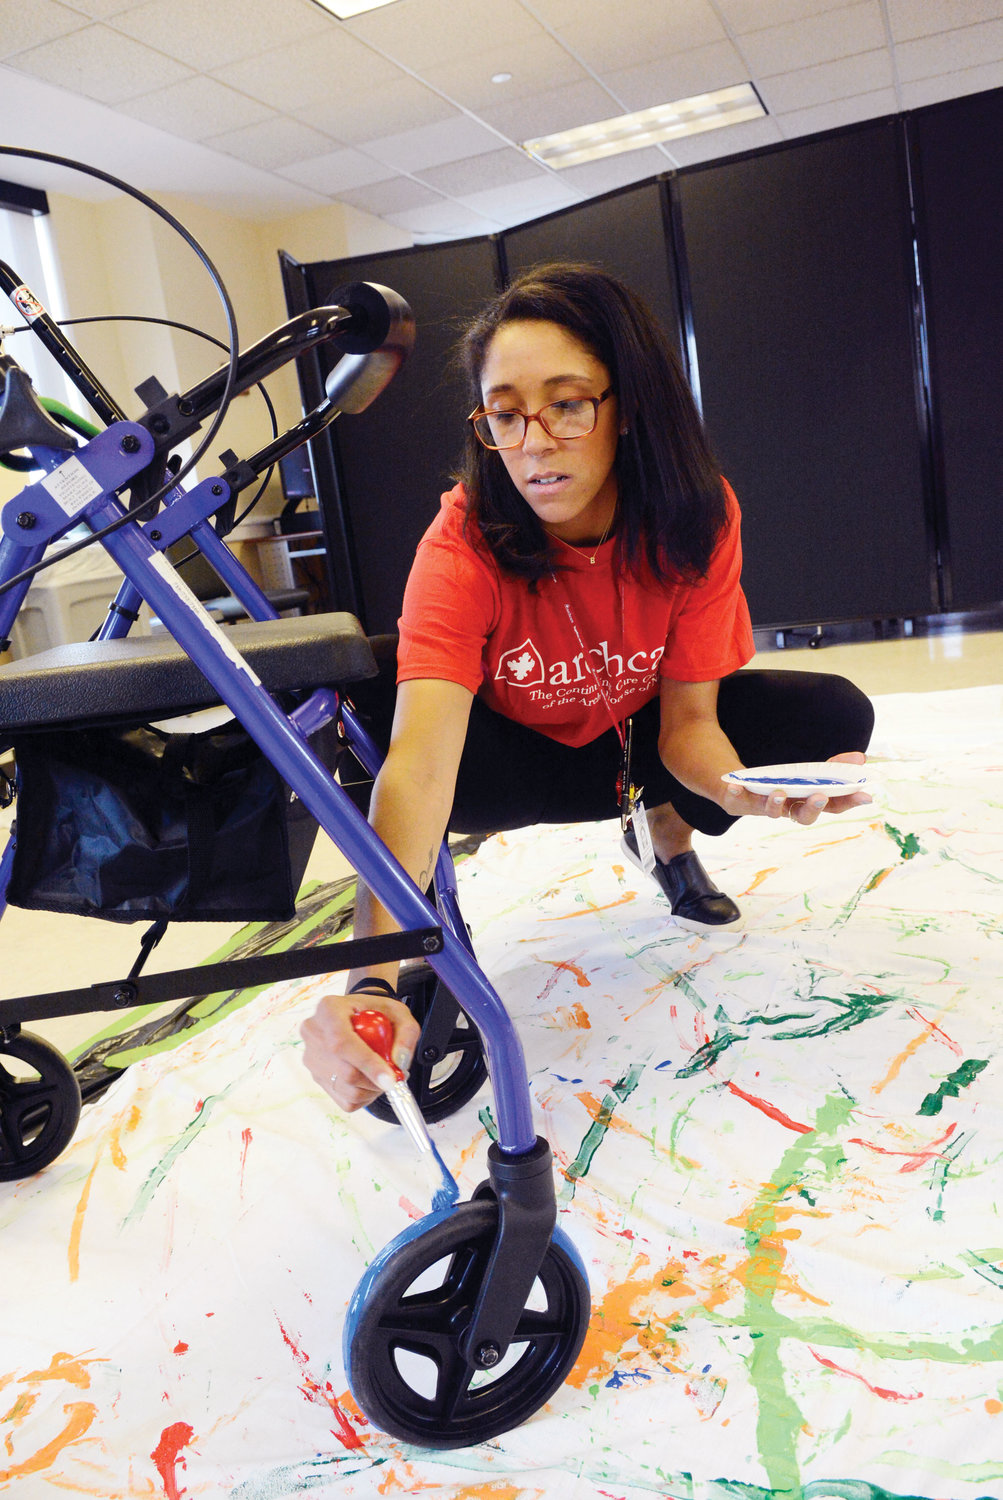 Staff, including Rebecca Love, recreational services supervisor, assisted the seniors March 25 in applying assorted colors of paint before the artists wheeled their modes of transportation across a canvas.